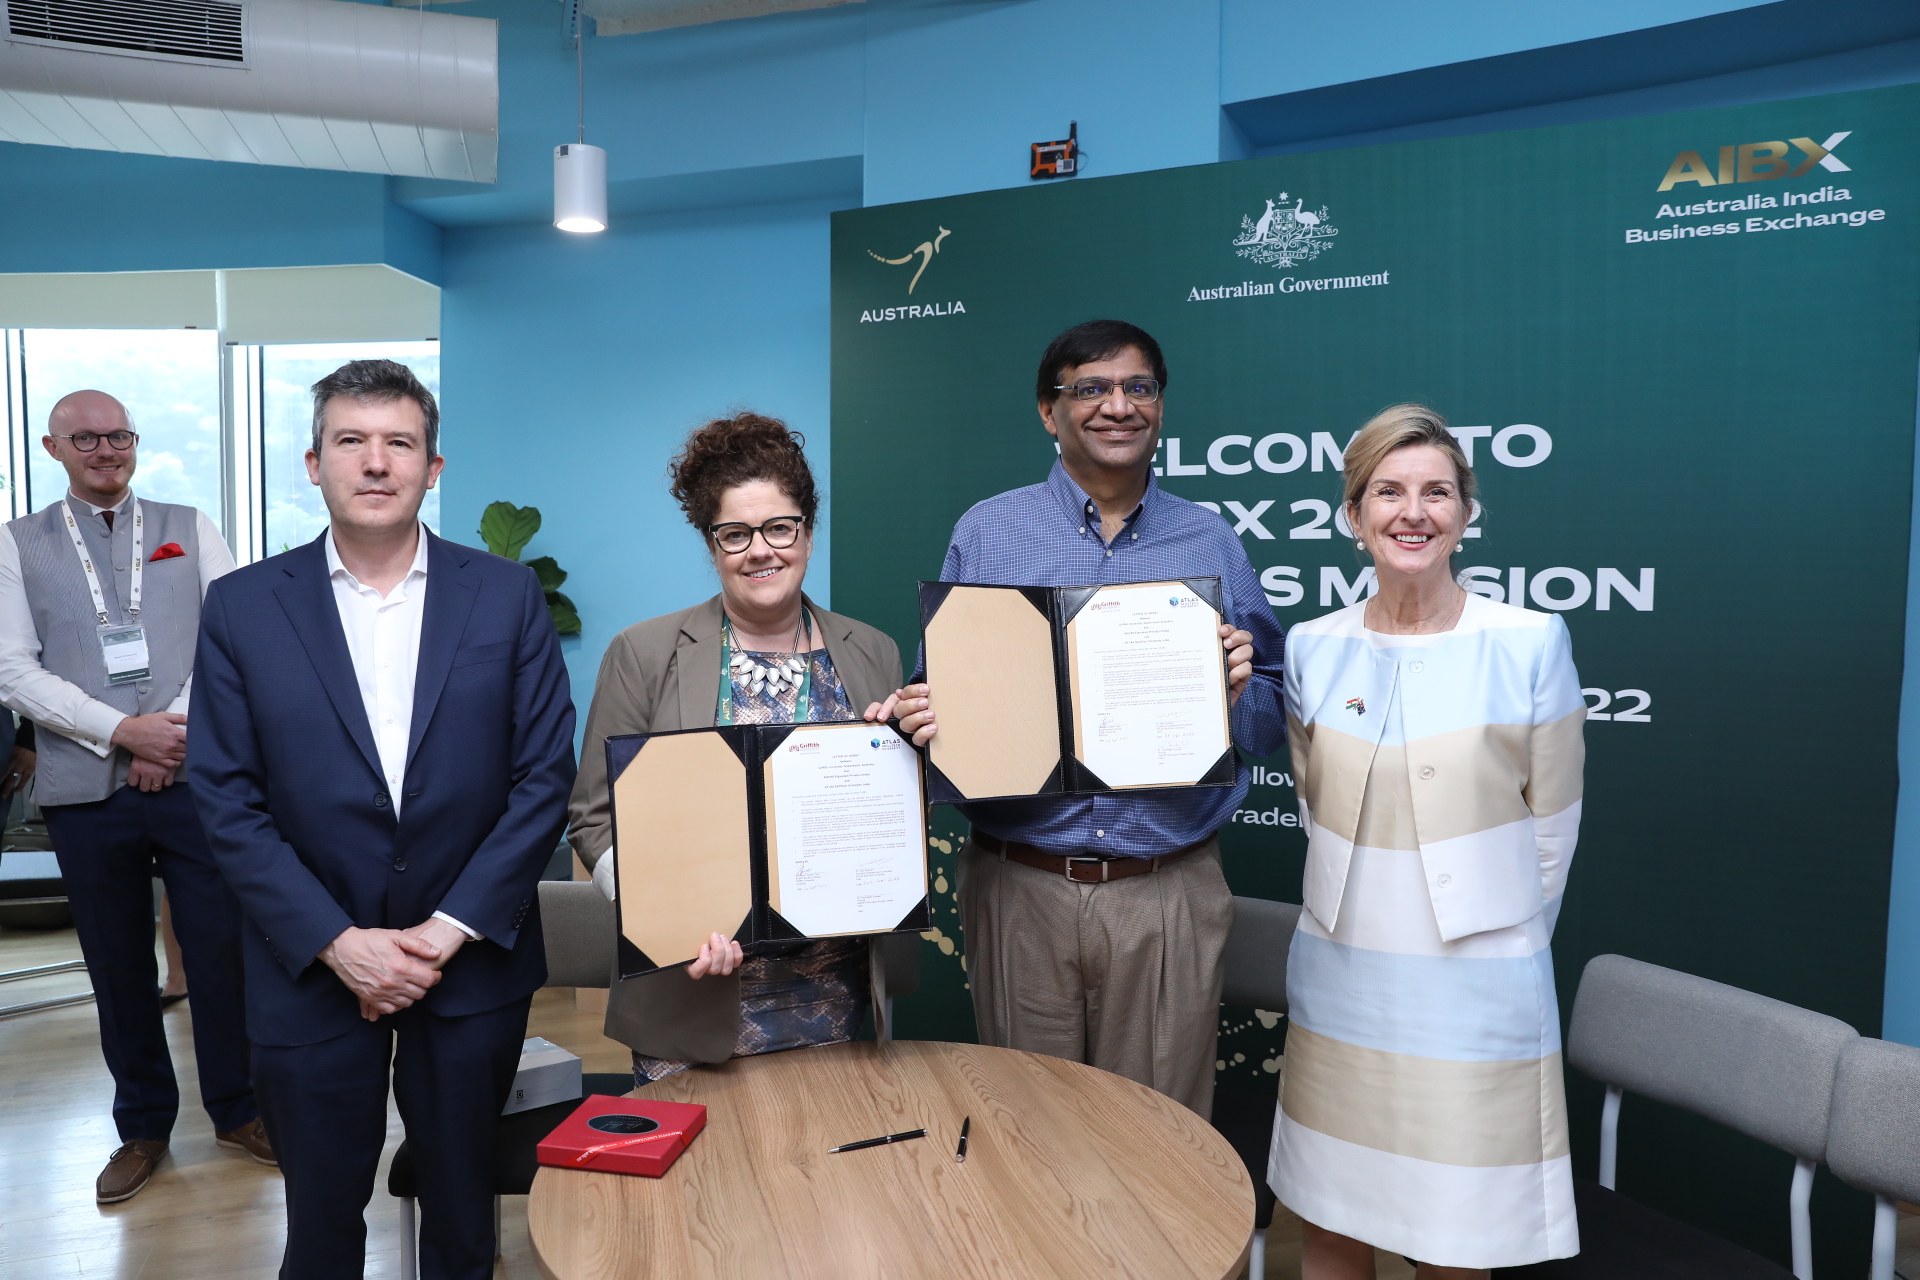 Austrade Education and Future Skills Initiatives and Australia–India Cybersecurity Hackathon Challenge launched at AIBX 2022 Business Mission event in Bengaluru